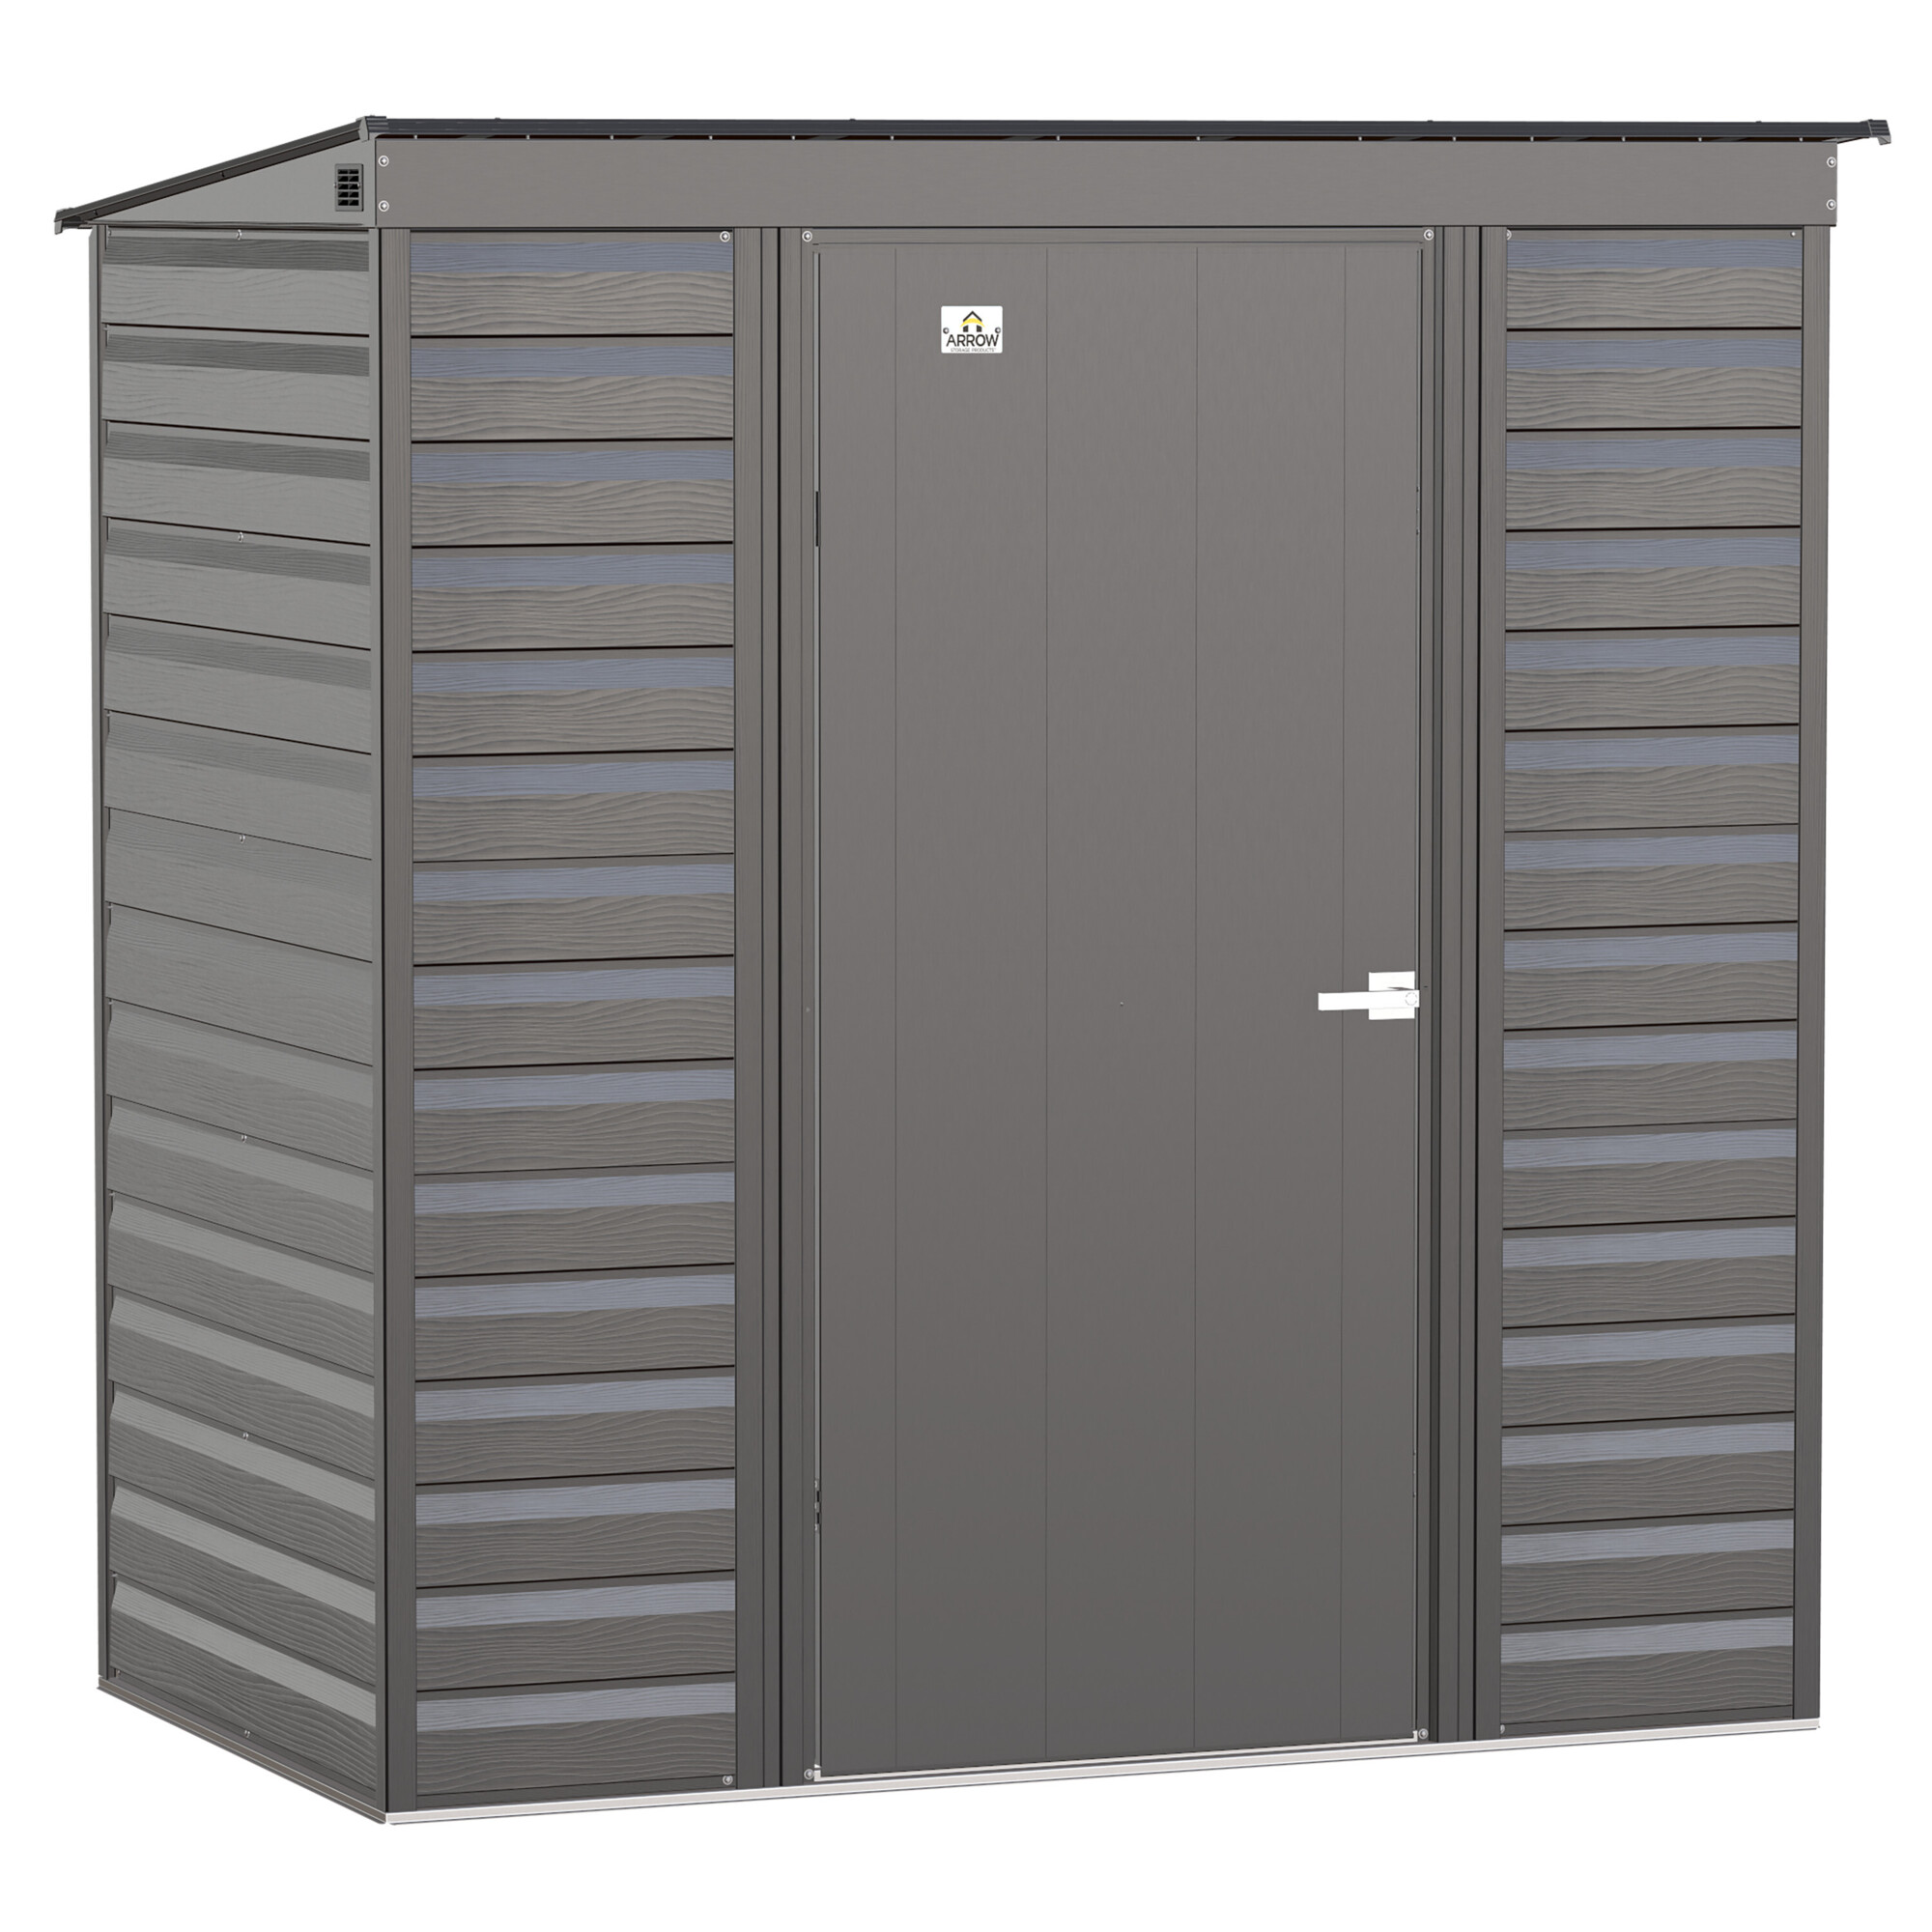 Arrow Storage Products, Select Steel Shed 6x4 Charcoal SCP64CC, Length 4 ft, Width 6 ft, Model SCP64CC